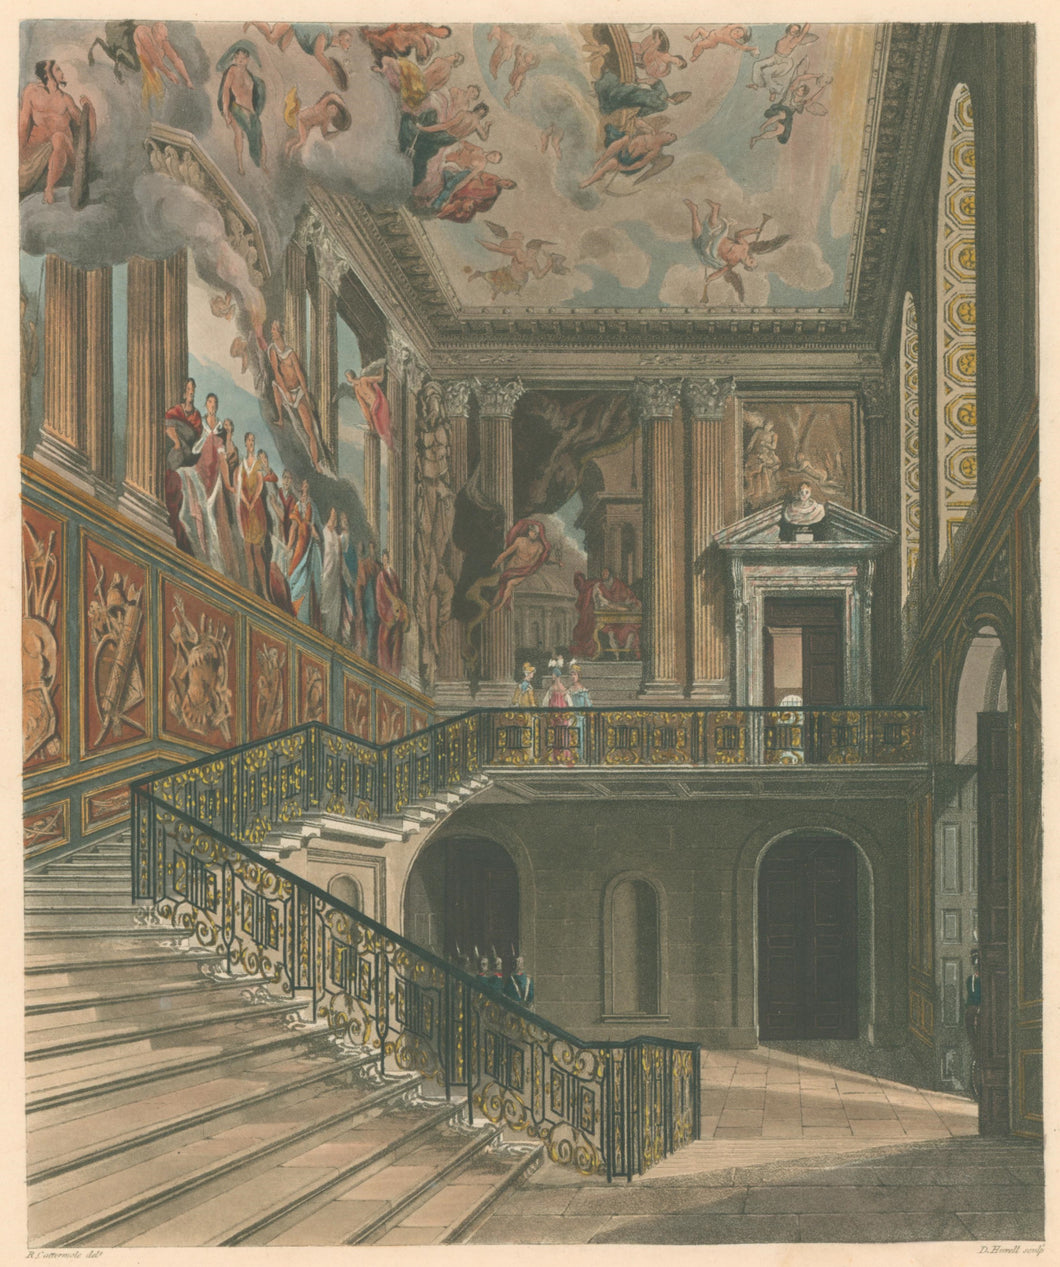 Pyne, W.H. “Grand Stair Case.